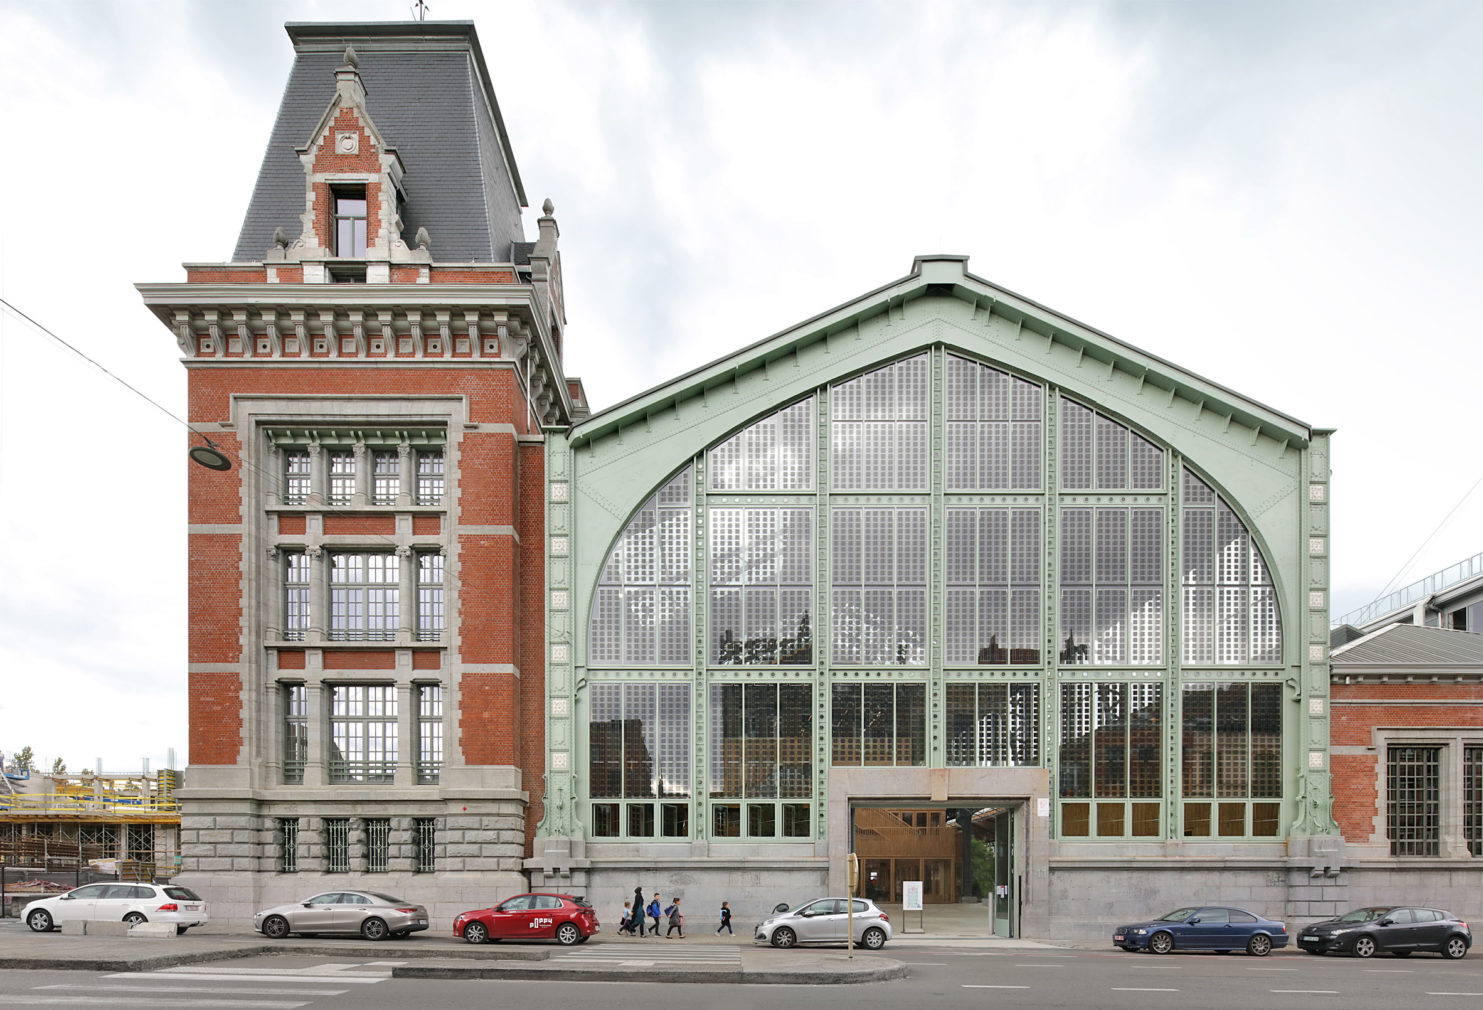 Brussels’ 113-year-old Gare Maritime terminus is revived as a new neighbourhood hub